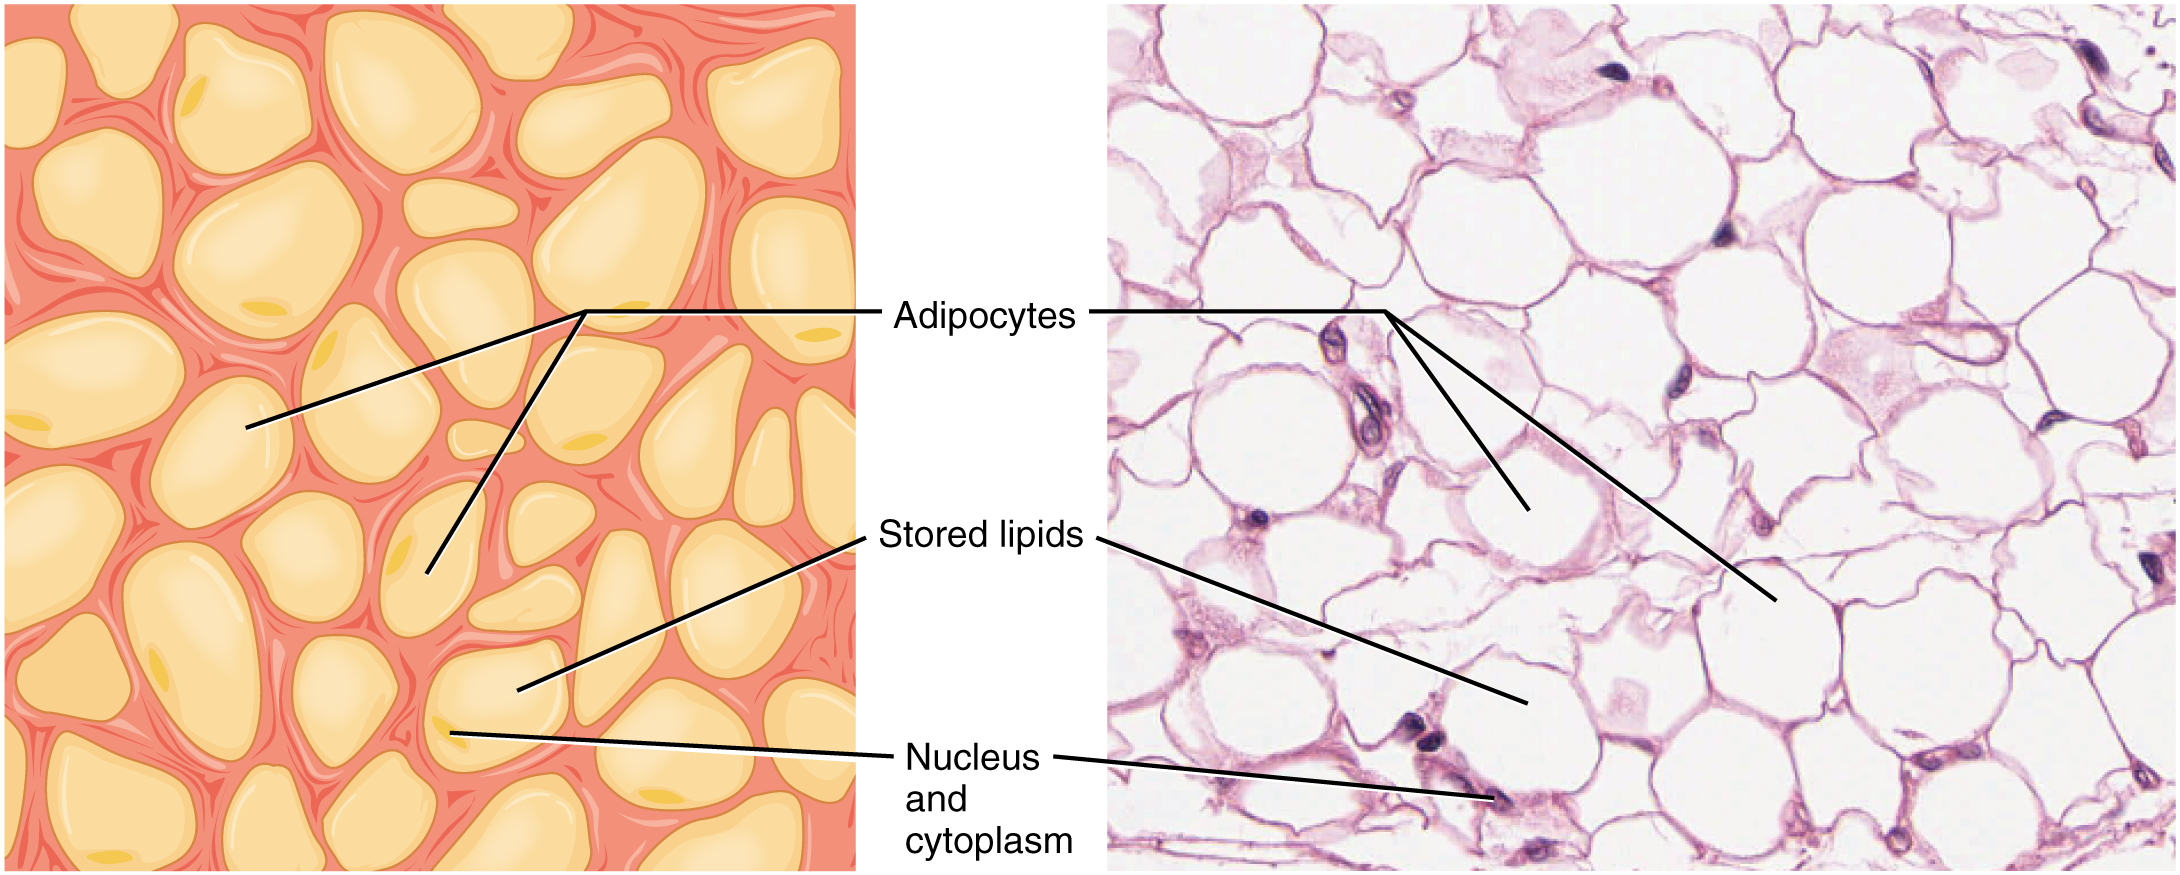 Image A shows a collection of yellow adipocytes that do not have a consistent shape or size, however, most have the general appearance of a kernel of corn with a wide end that tapers to a point. Each adipocyte has a nucleus occupying a small area on one side of the cell. Nothing else is visible within the cells. Image B shows a micrograph of adipose tissue. Here, the adipocytes are stained purple. However, only their edges and their nuclei stain, giving the adipose tissue a honeycomb appearance. The adipocytes in the micrograph are large and round, but still show a diversity of shapes and sizes. The nucleus appears as a dark staining area very close to the cell membrane.